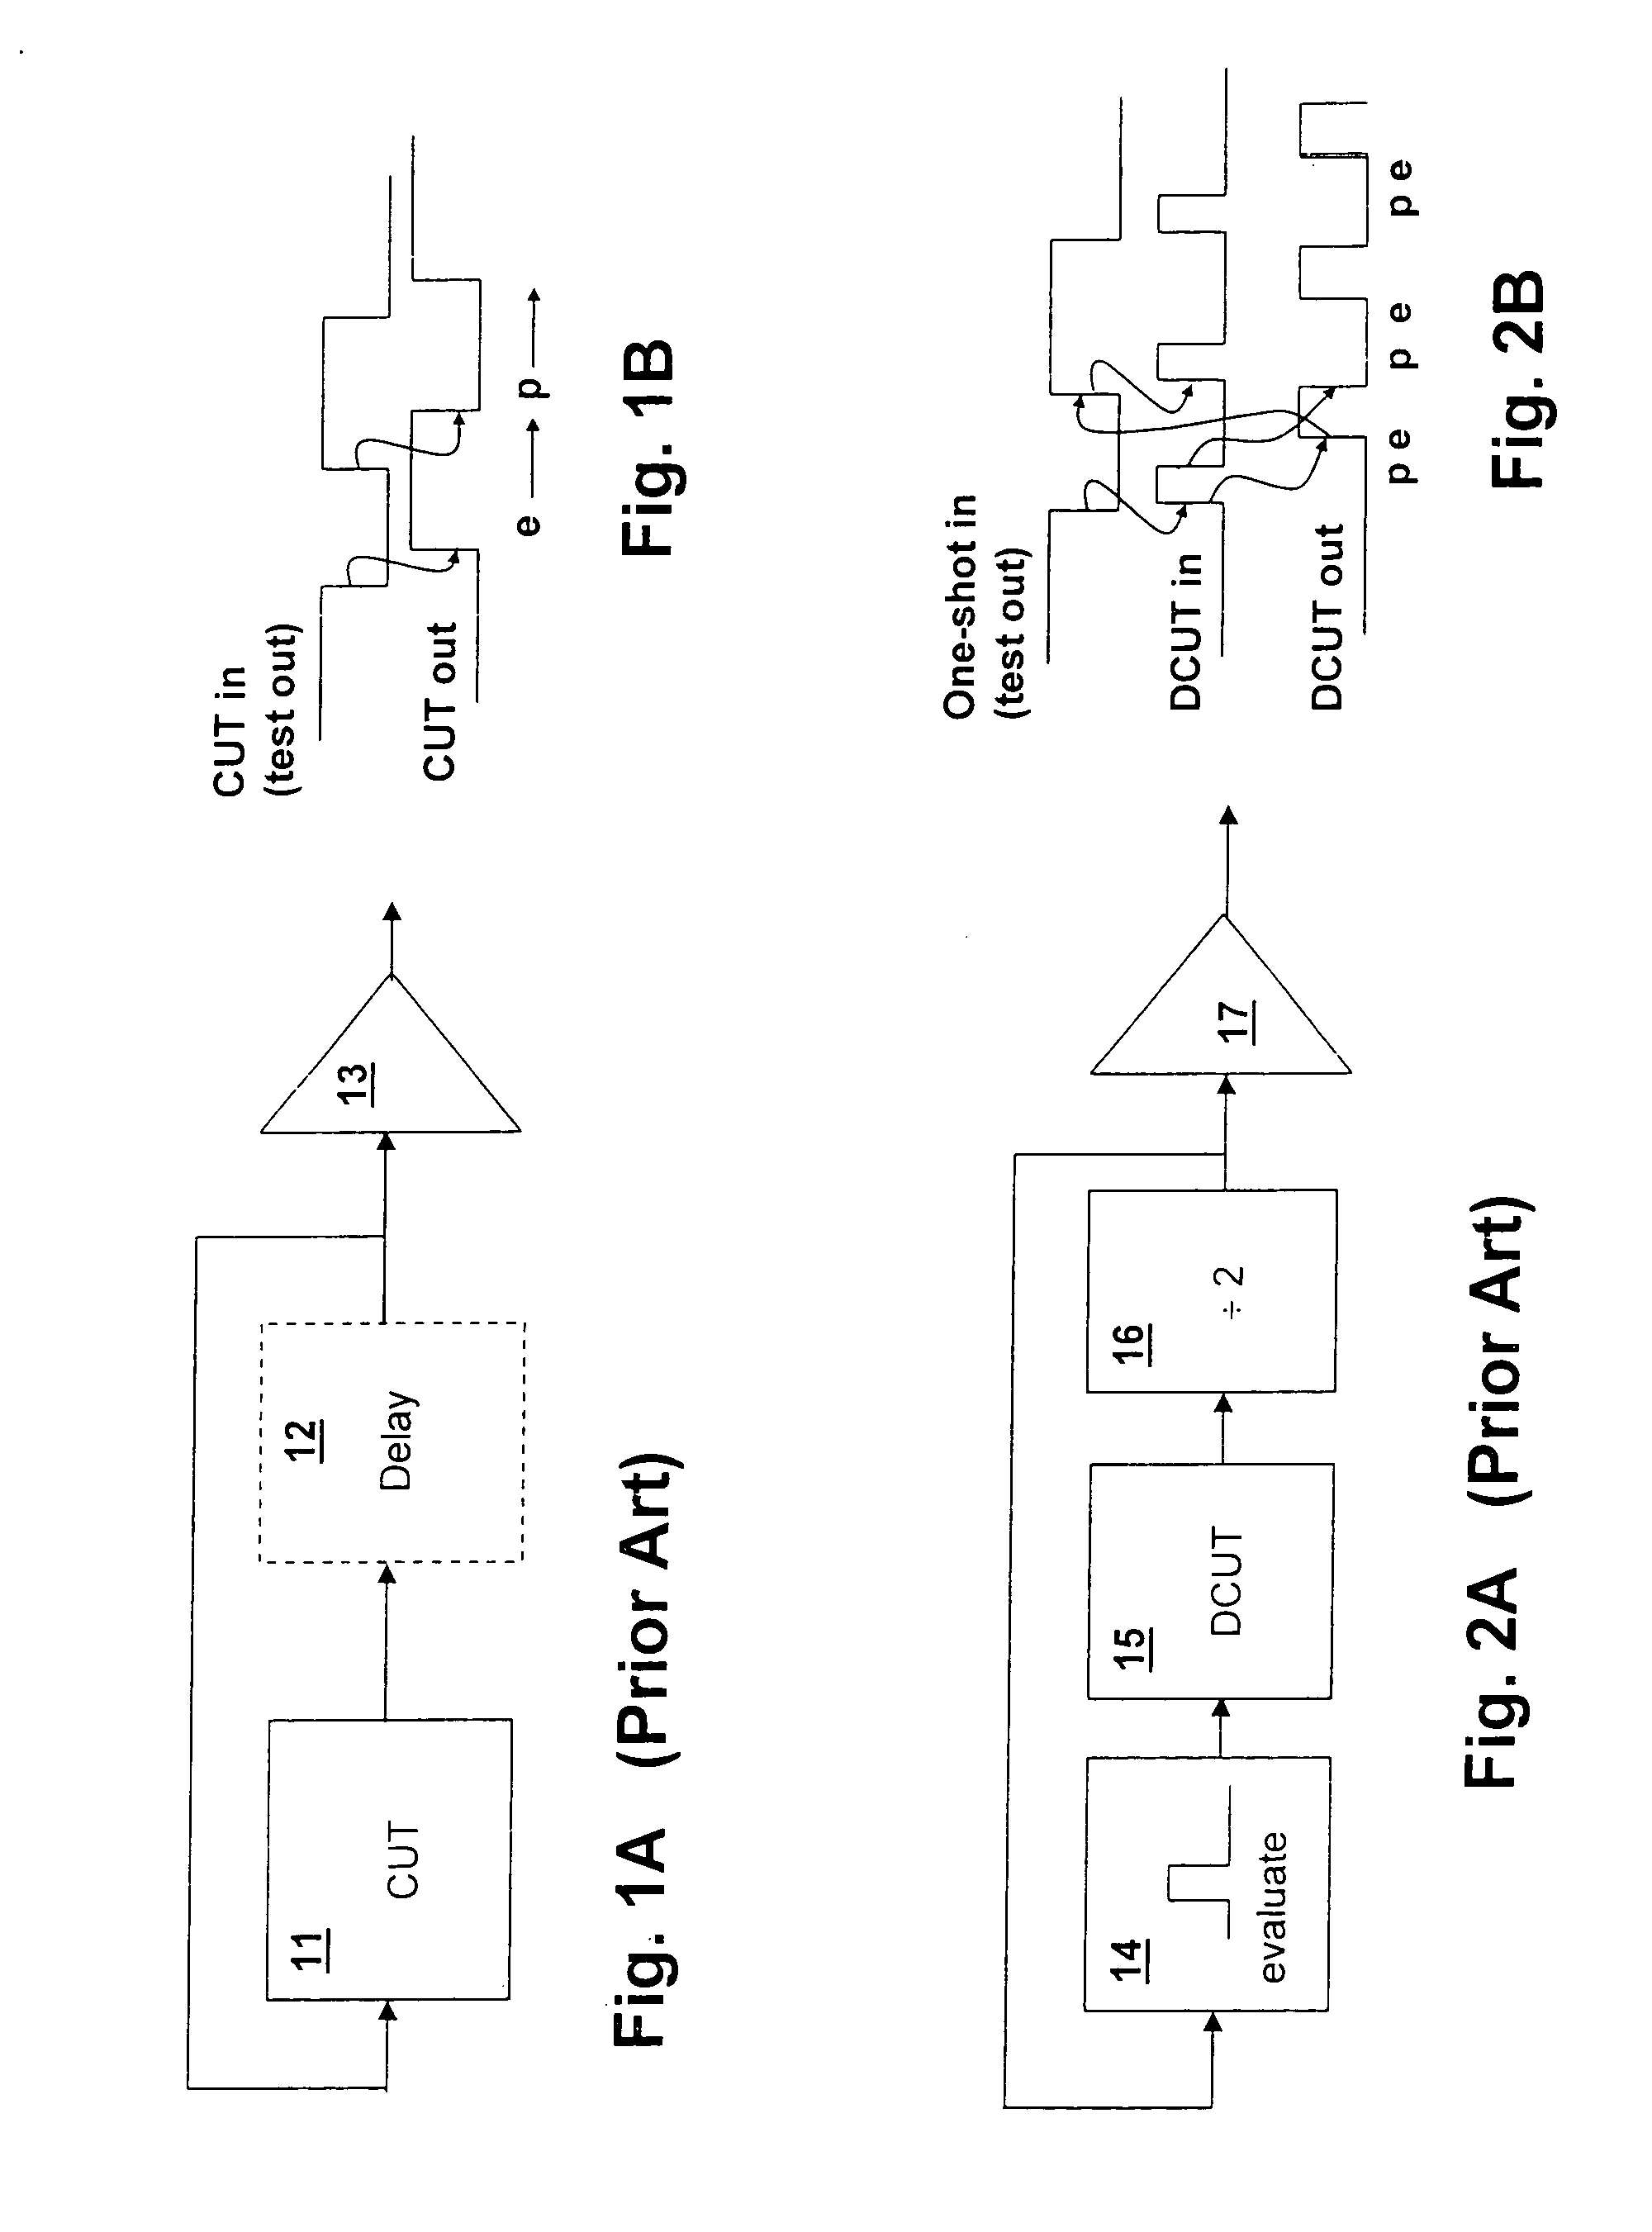 Method and ring oscillator circuit for measuring circuit delays over a wide operating range